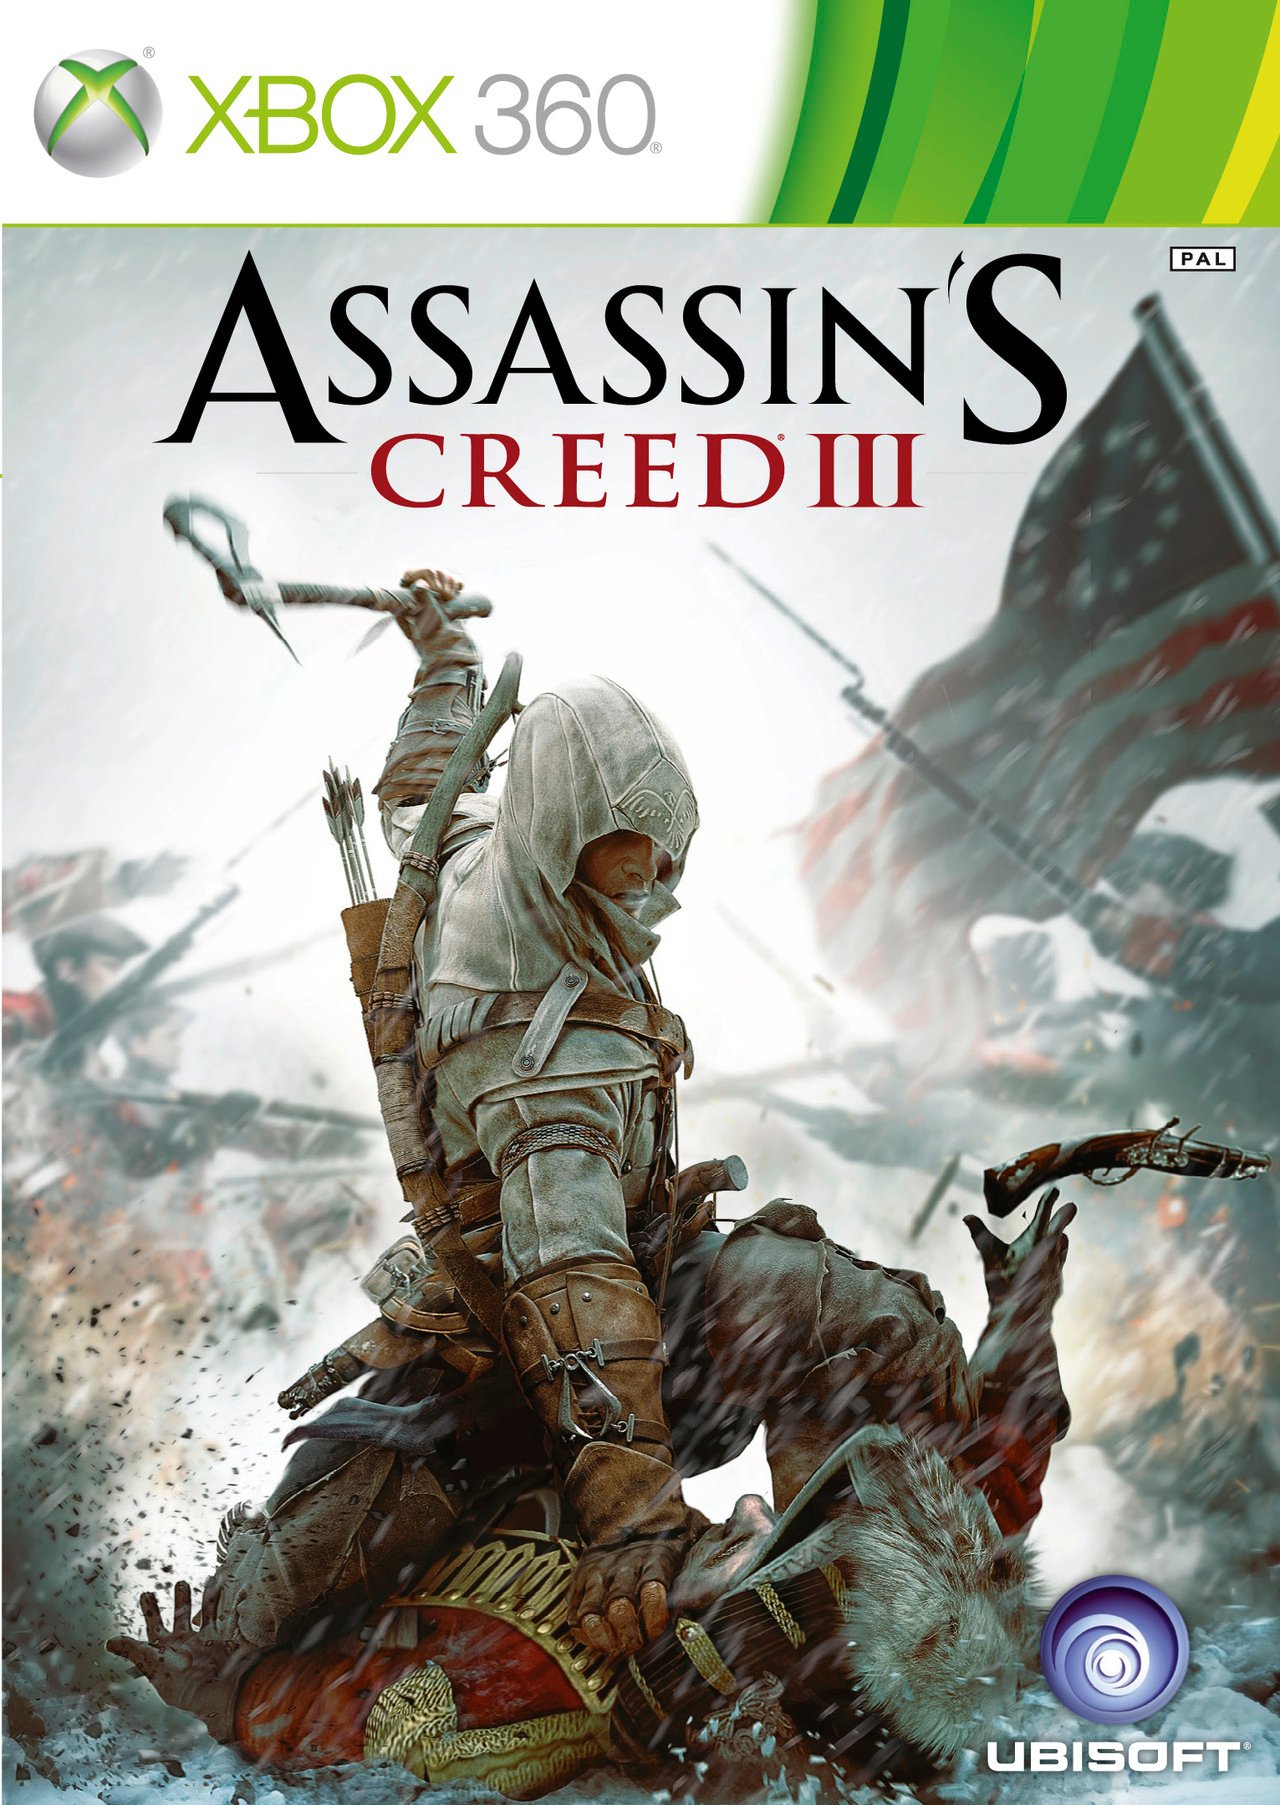 http://image.jeuxvideo.com/images/jaquettes/00042824/jaquette-assassin-s-creed-iii-xbox-360-cover-avant-g-1330622570.jpg